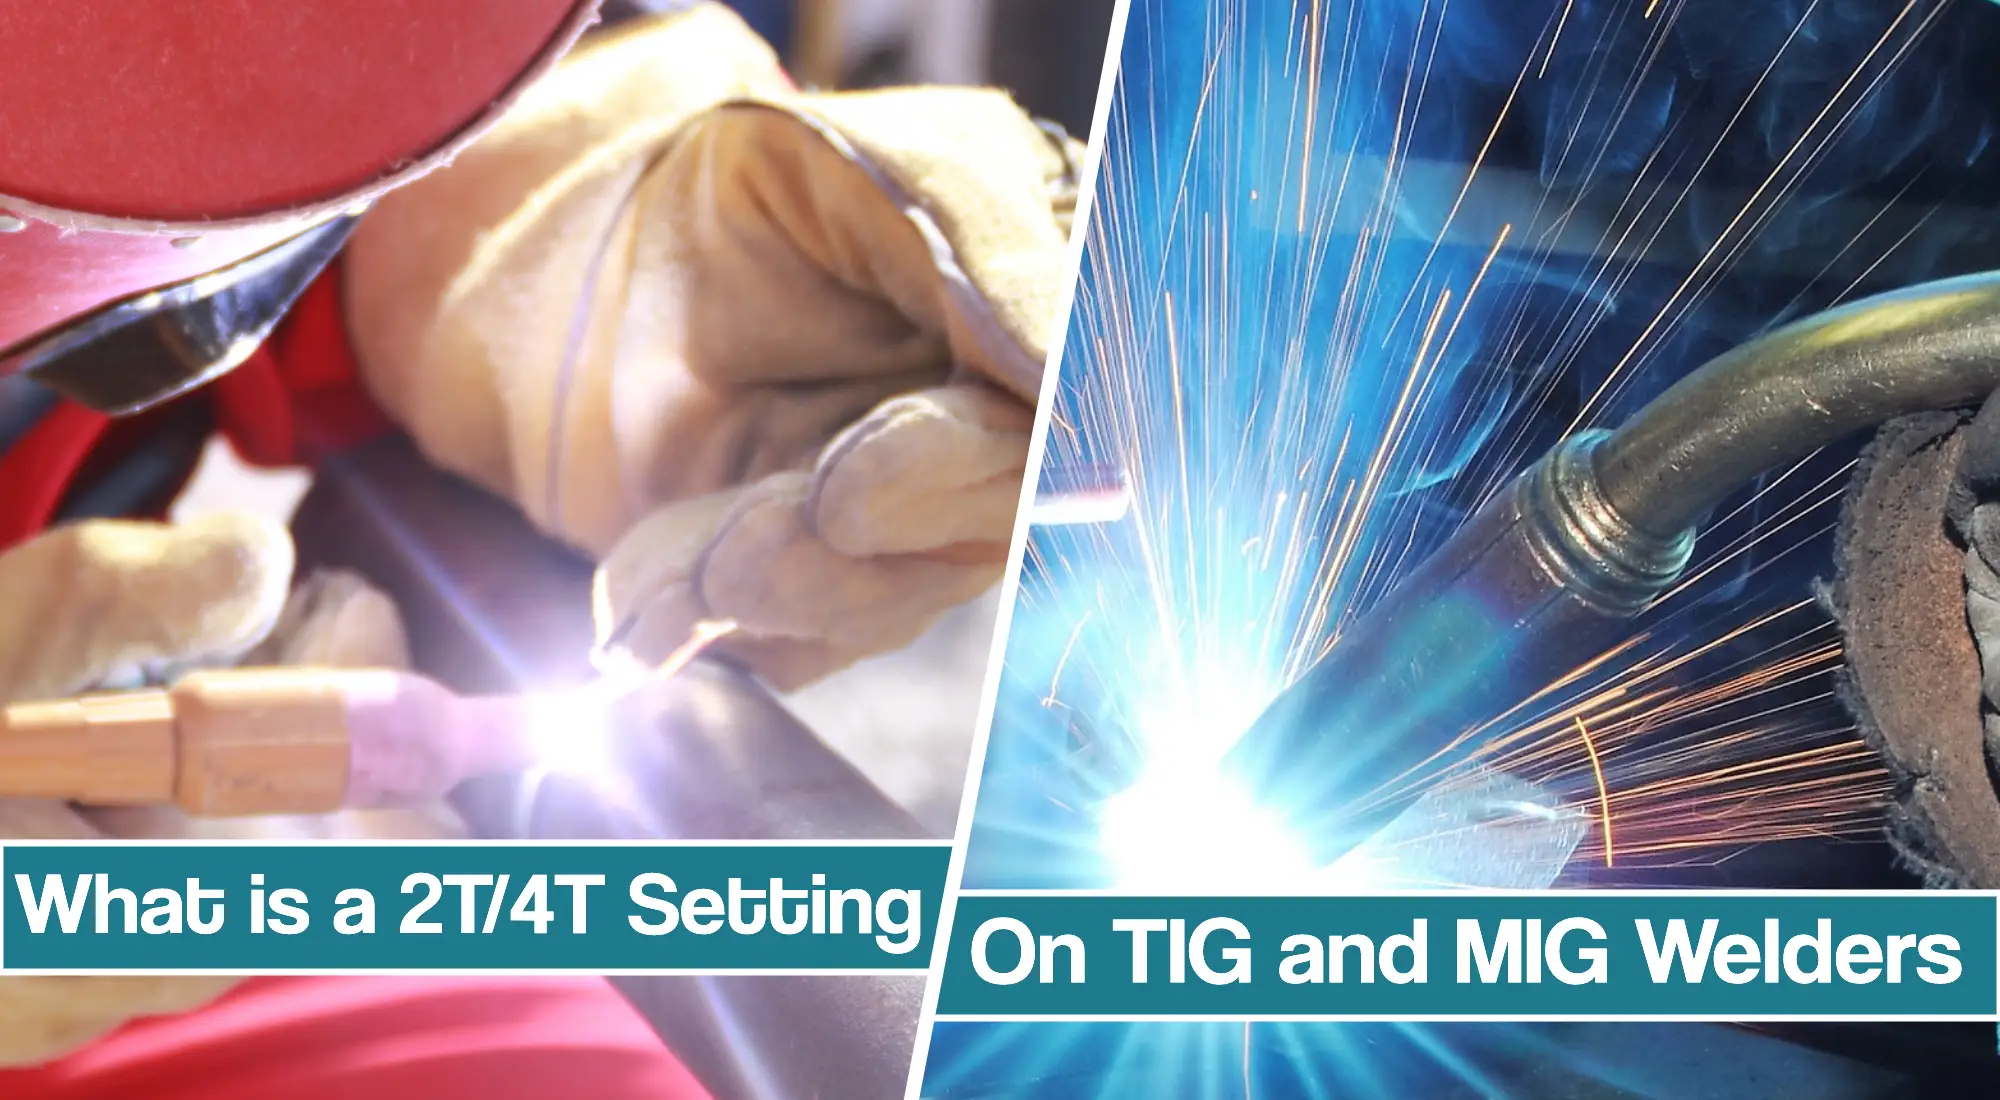 2T vs 4T Features in Welding – What do they stand for?